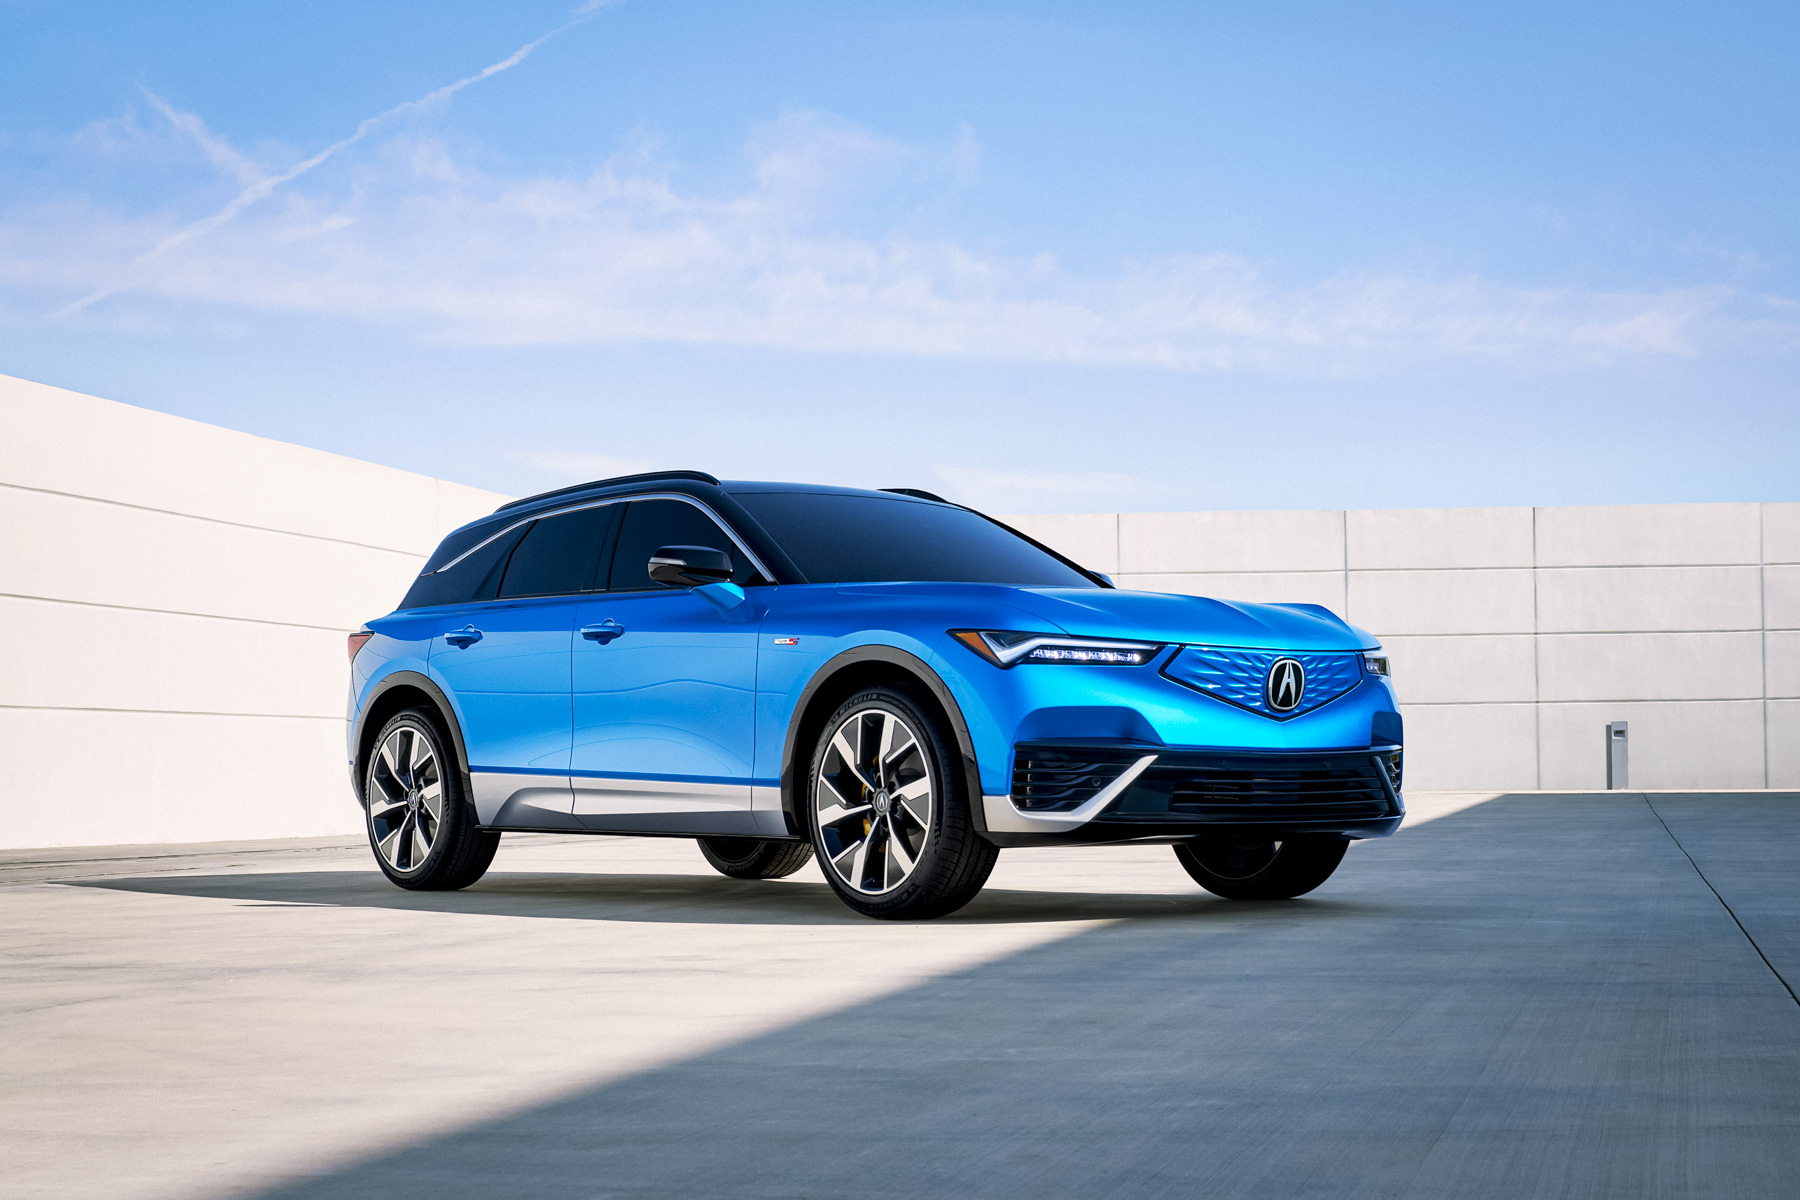 Acura introduced the first electric crossover ZDX